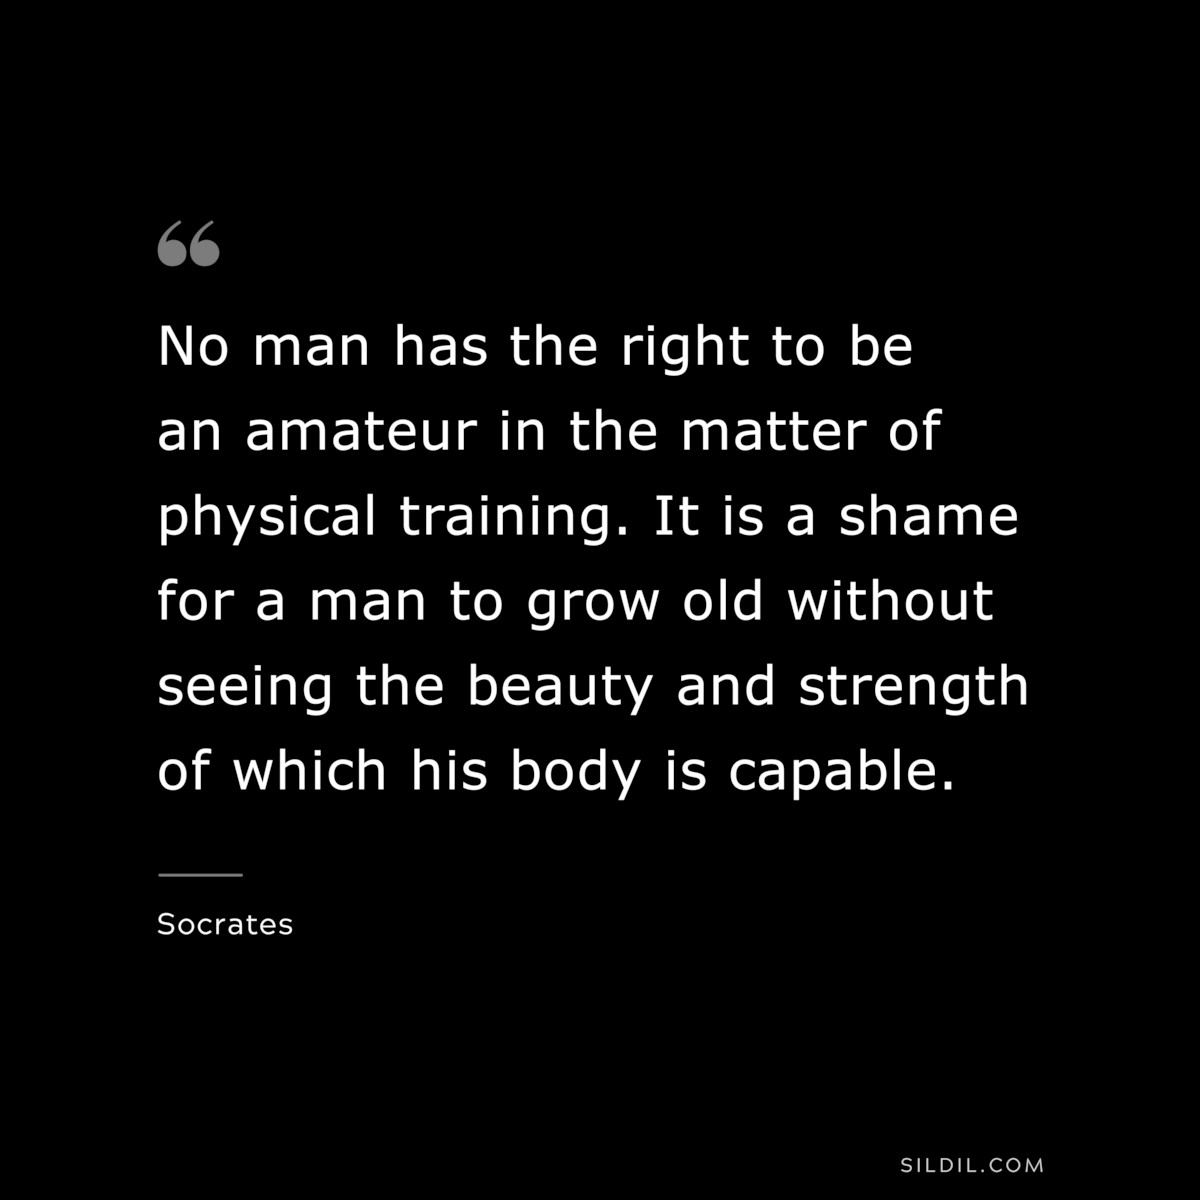 No man has the right to be an amateur in the matter of physical training. It is a shame for a man to grow old without seeing the beauty and strength of which his body is capable. ― Socrates